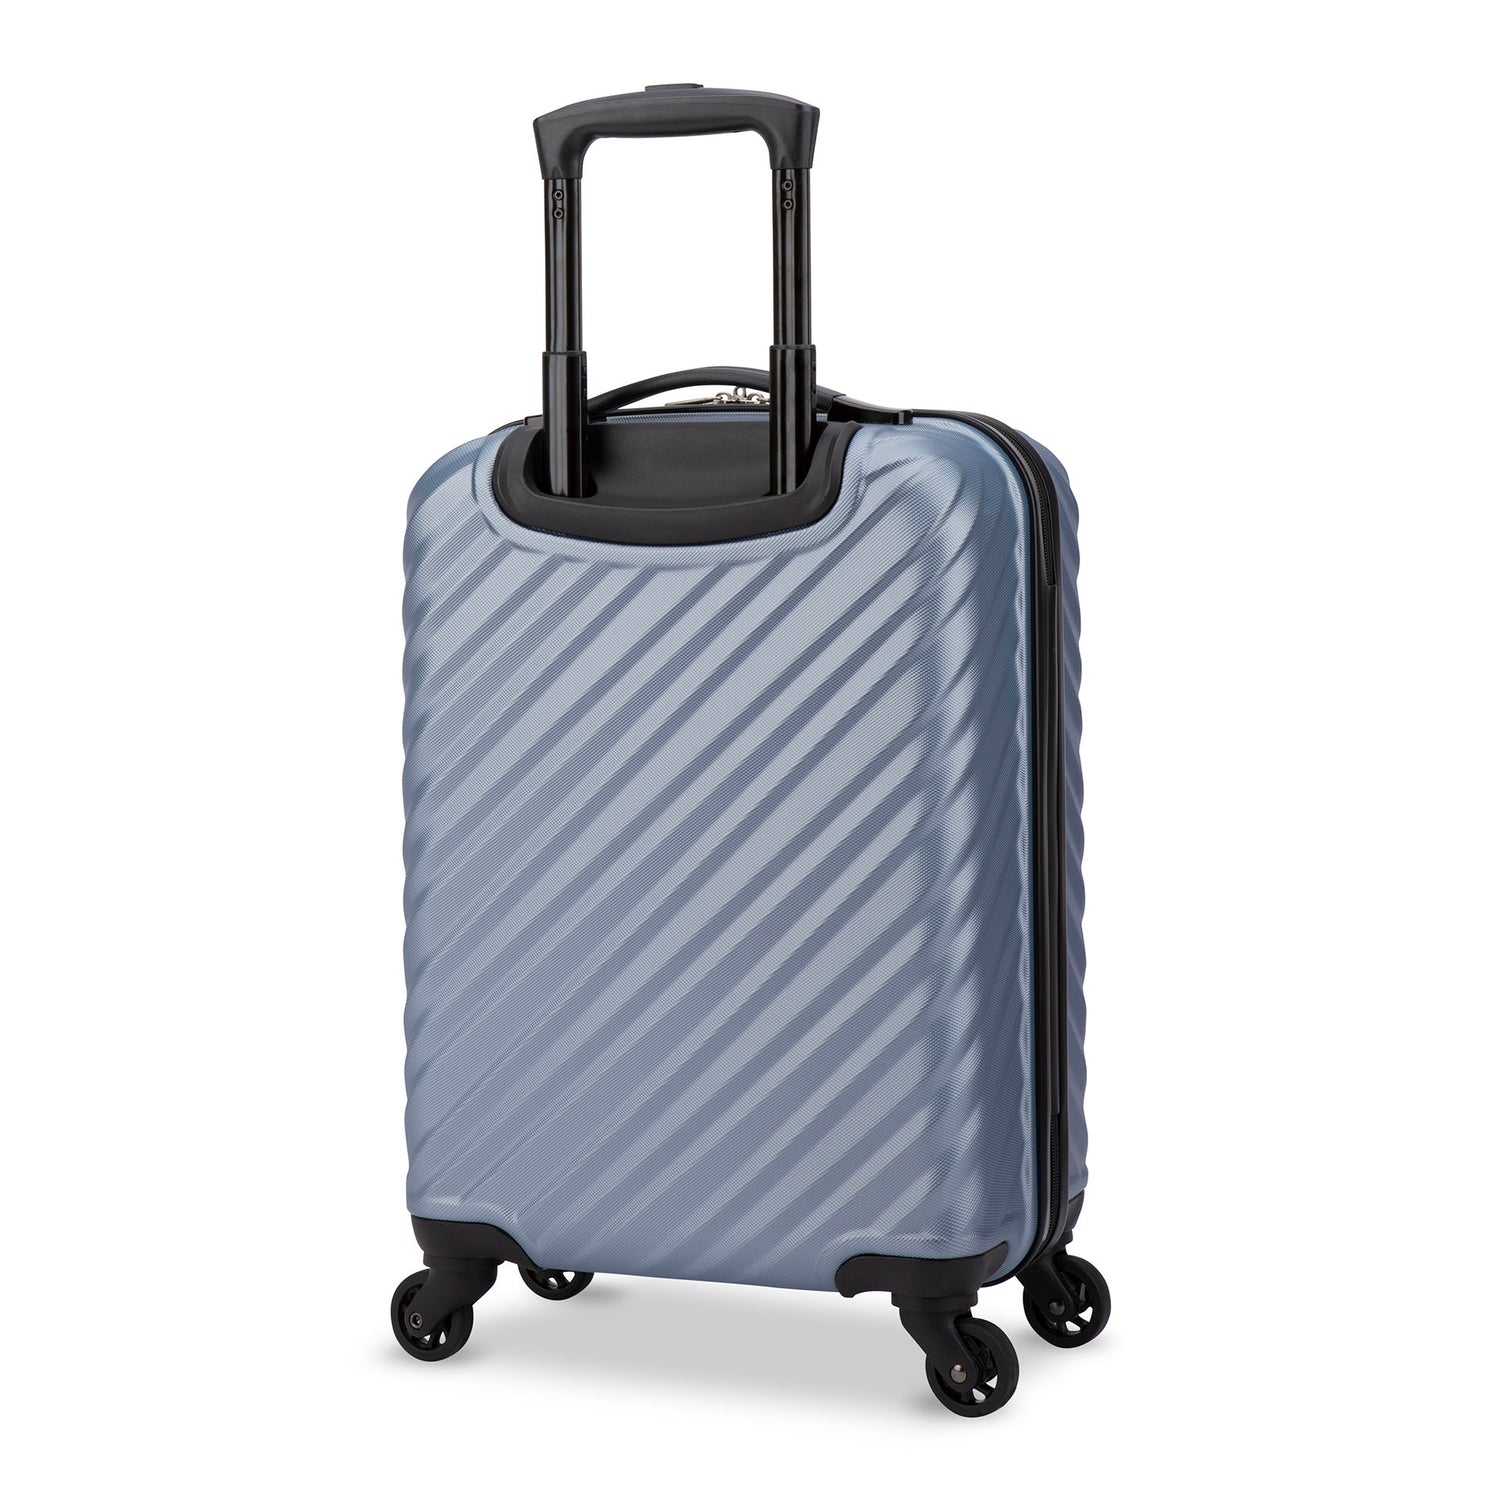 Back side view of a silverish blue hard side luggage called MOD designed by Swiss Gear sold at Bentley, showcasing its telescopic handle and resistant-absorbant texture.